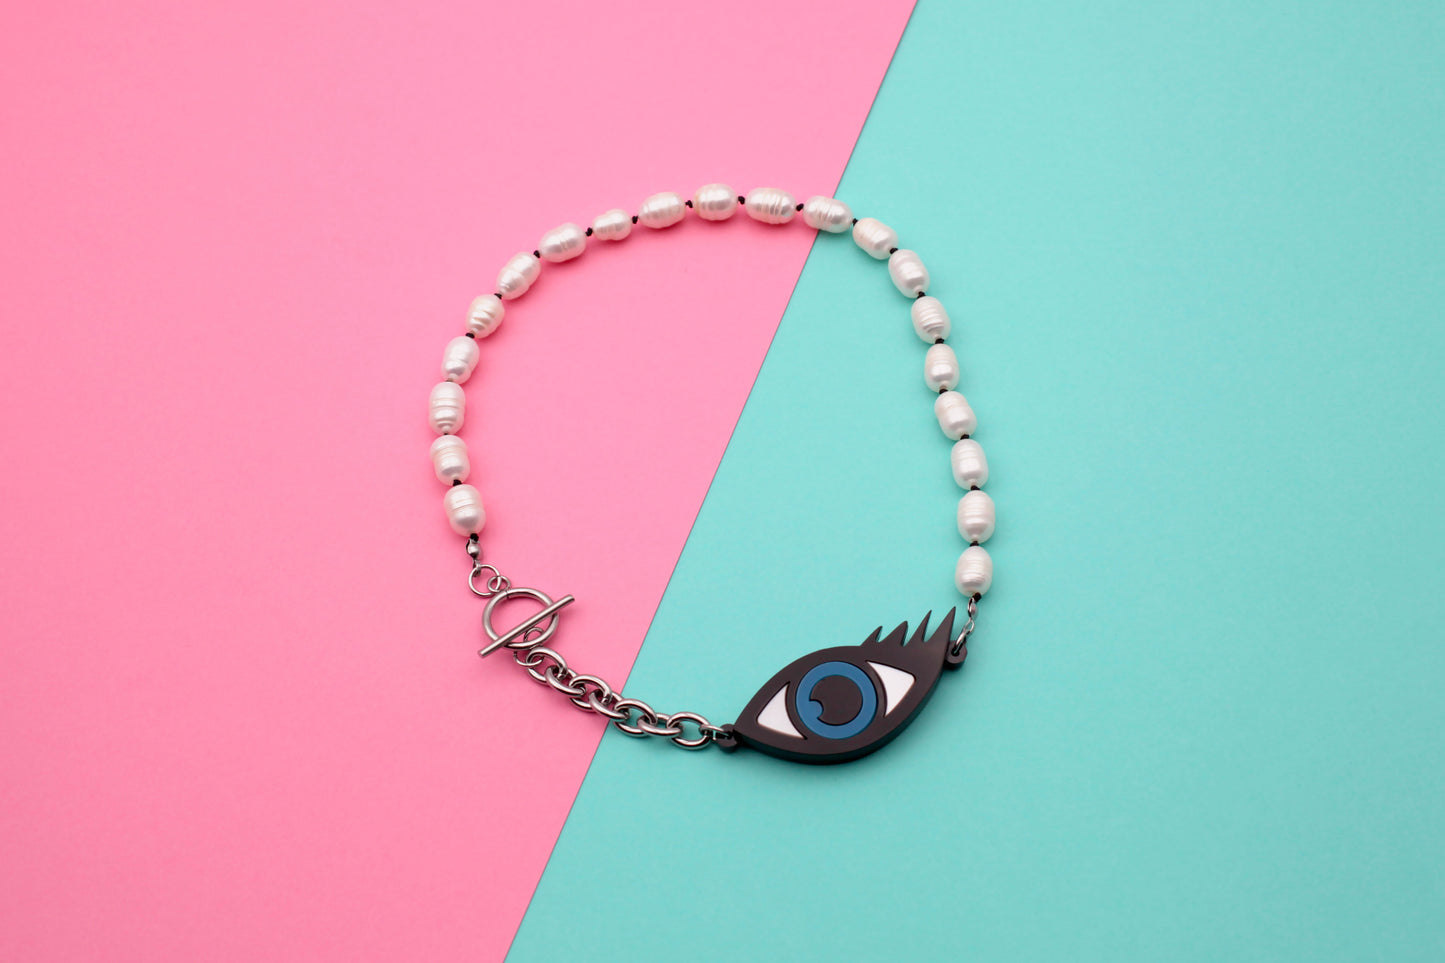 statement, evil eye and pearls necklace, on a pink and blue background.  